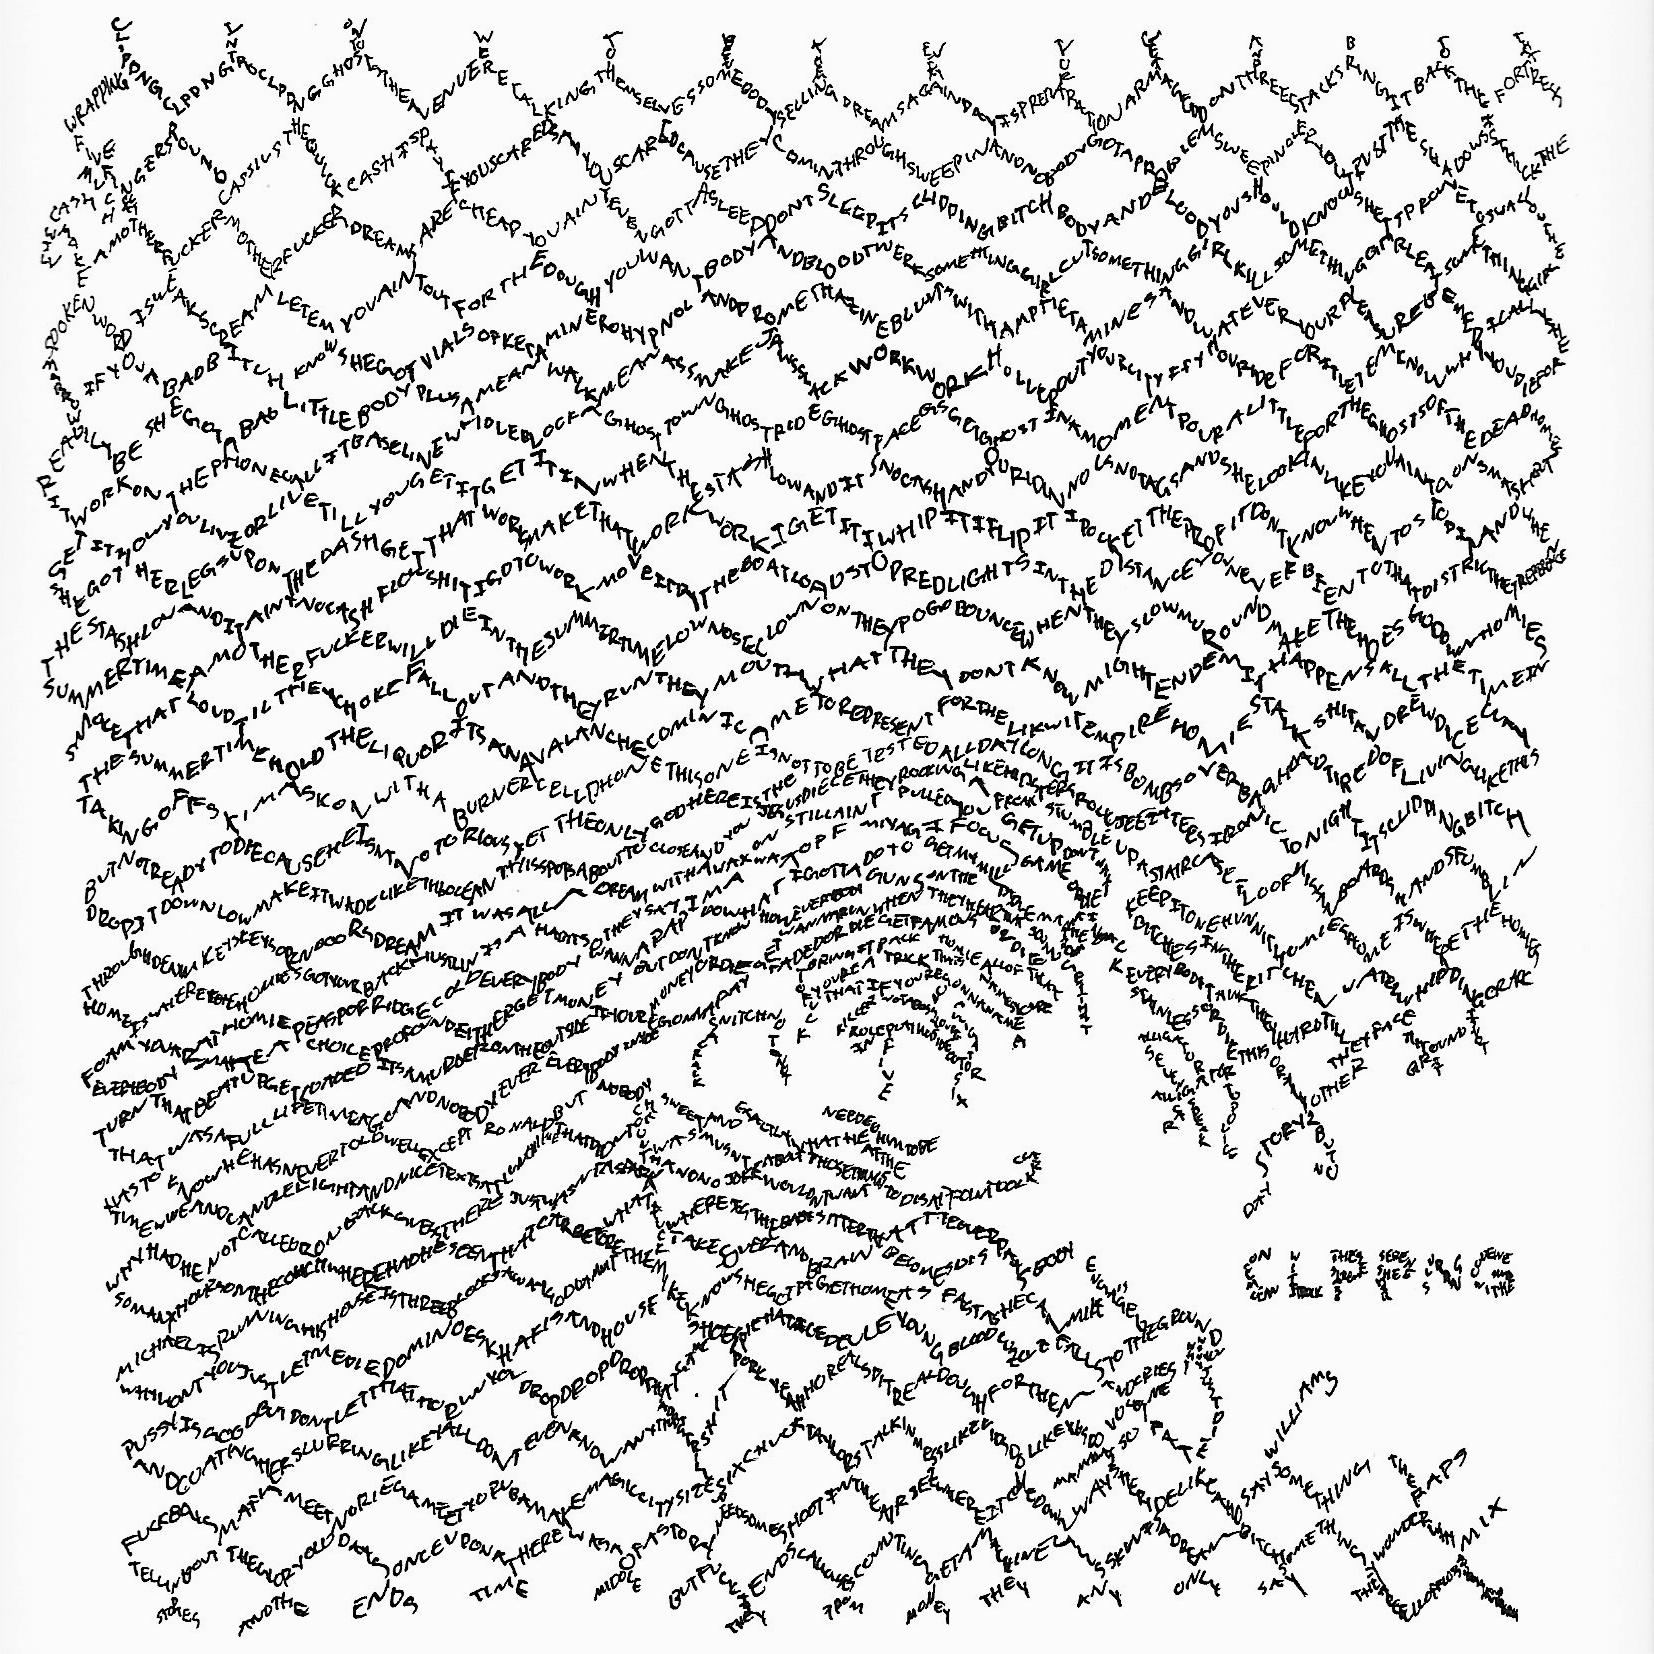 bandcamp picks of the week clppng acapella